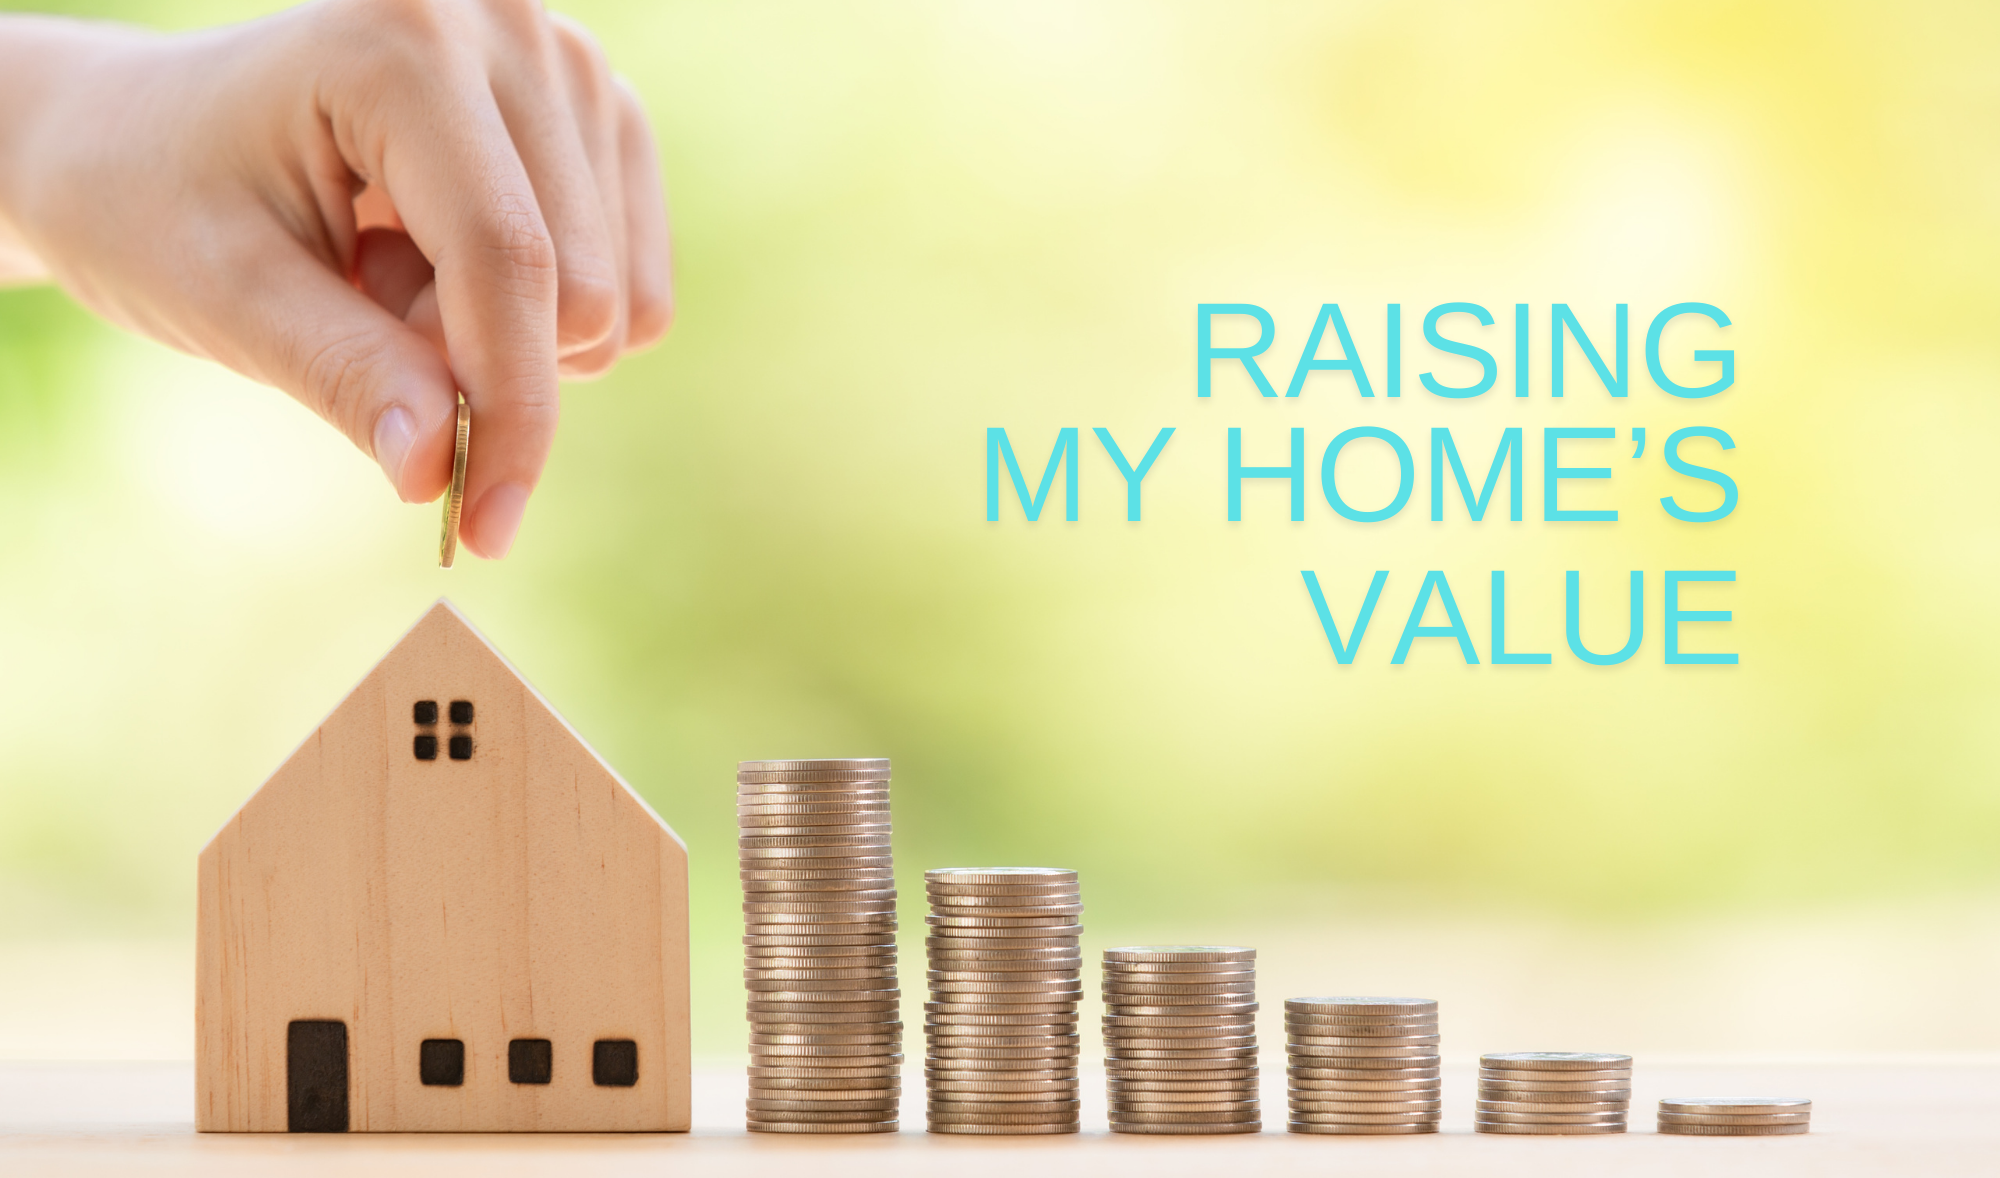 How to raise the value of your home in Virginia